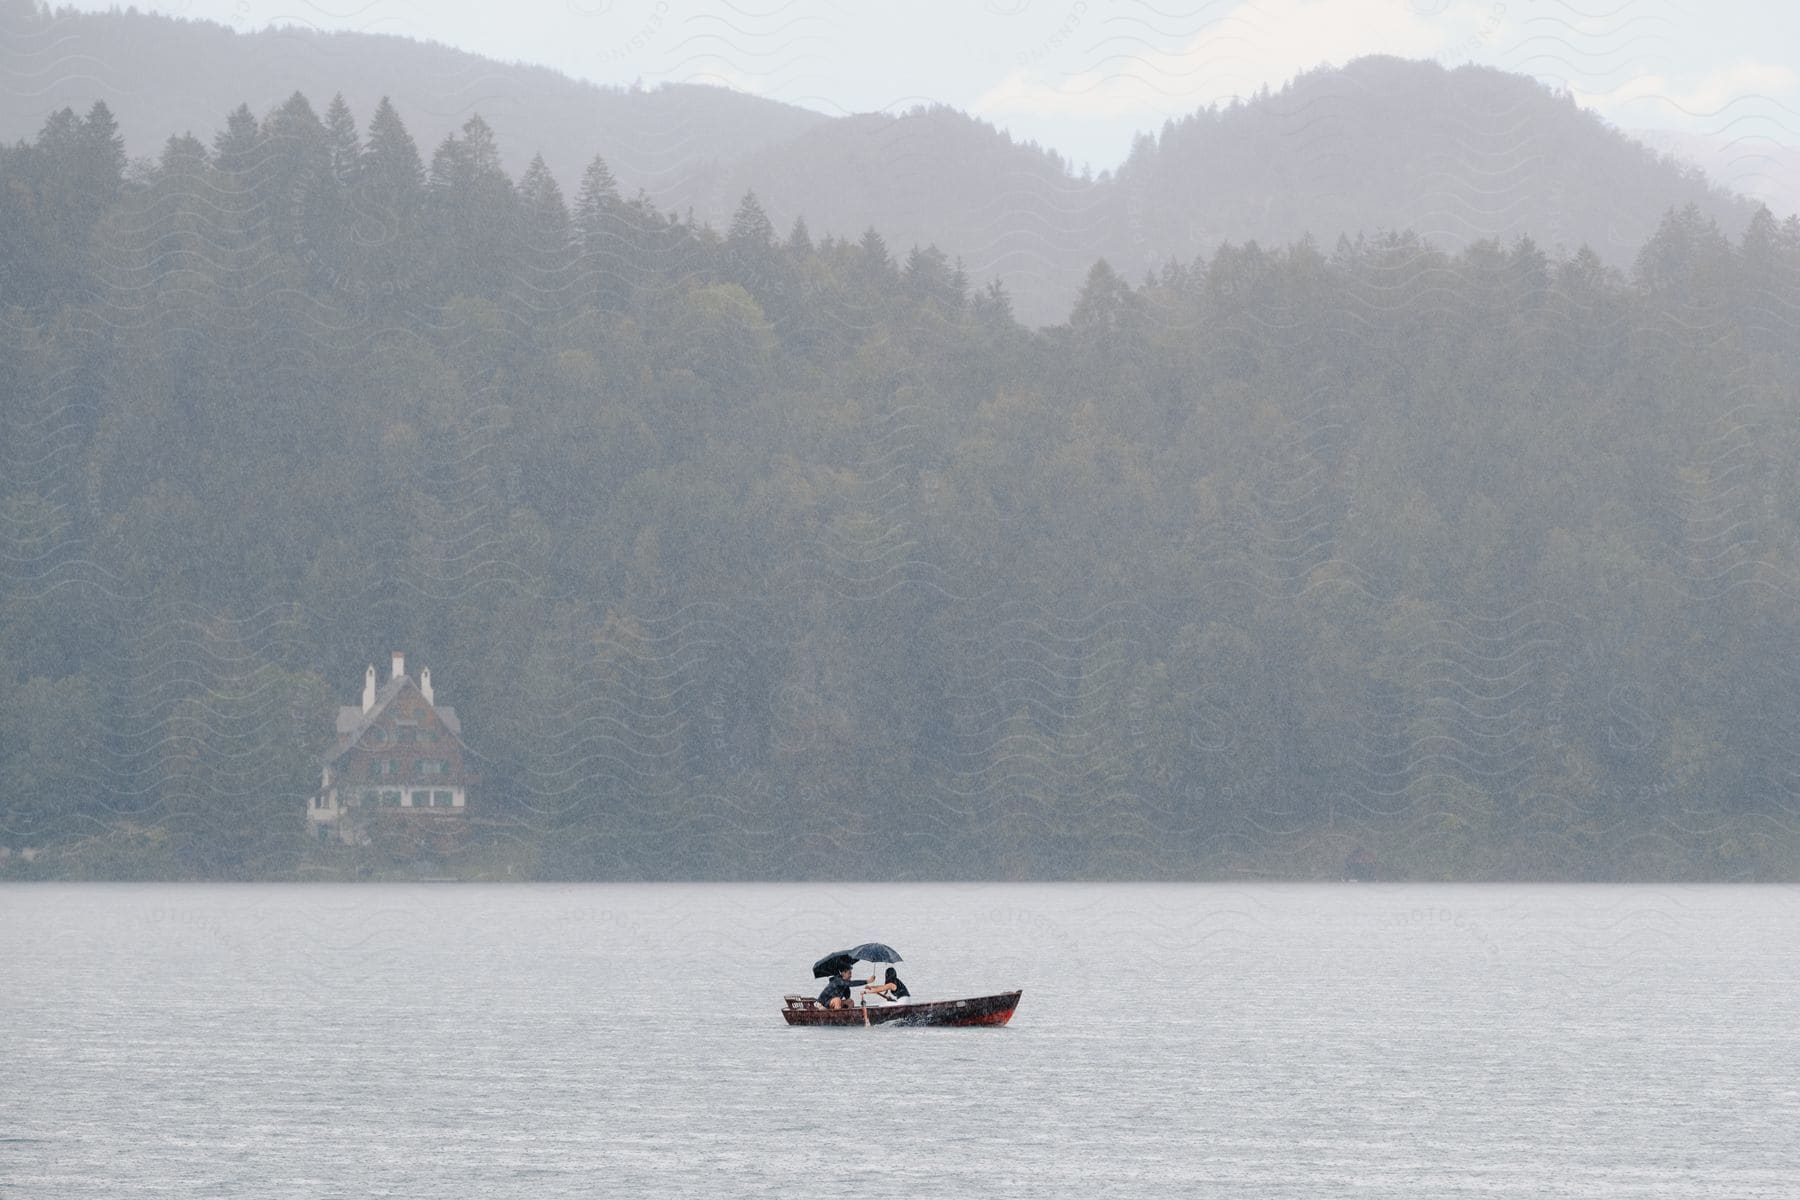 A man and woman are caught in the rain while in a row boat on a lake with forested hills in the background in the daytime.